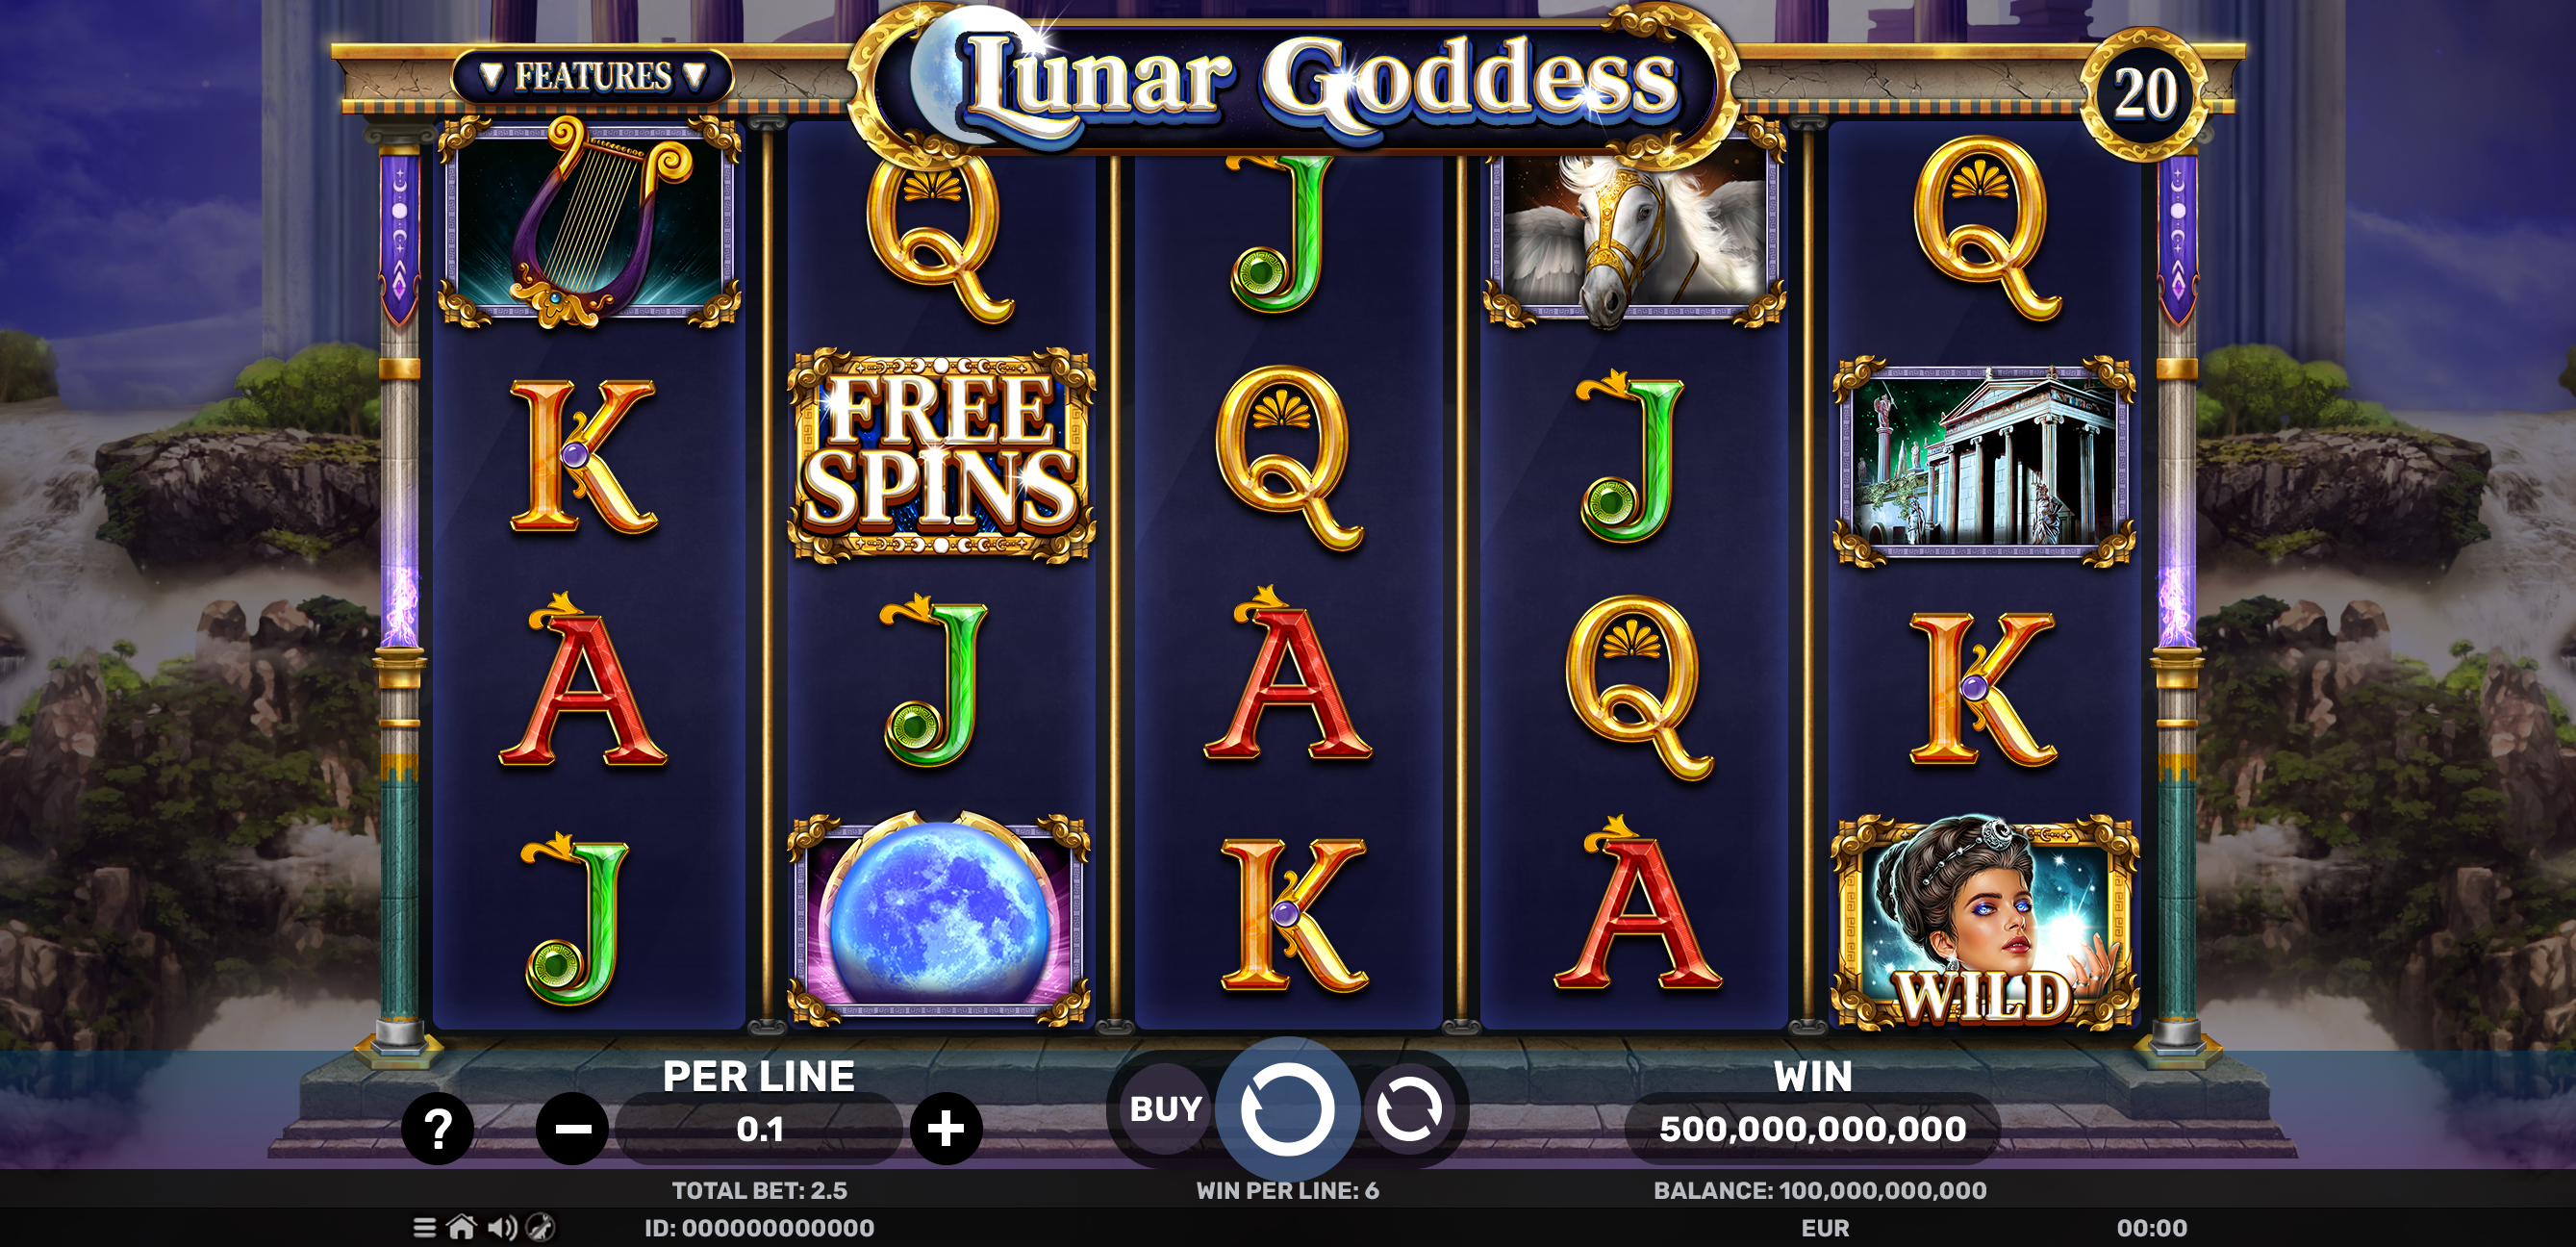 spinomenal-delivers-a-celestial-treat-with-lunar-goddess-slot